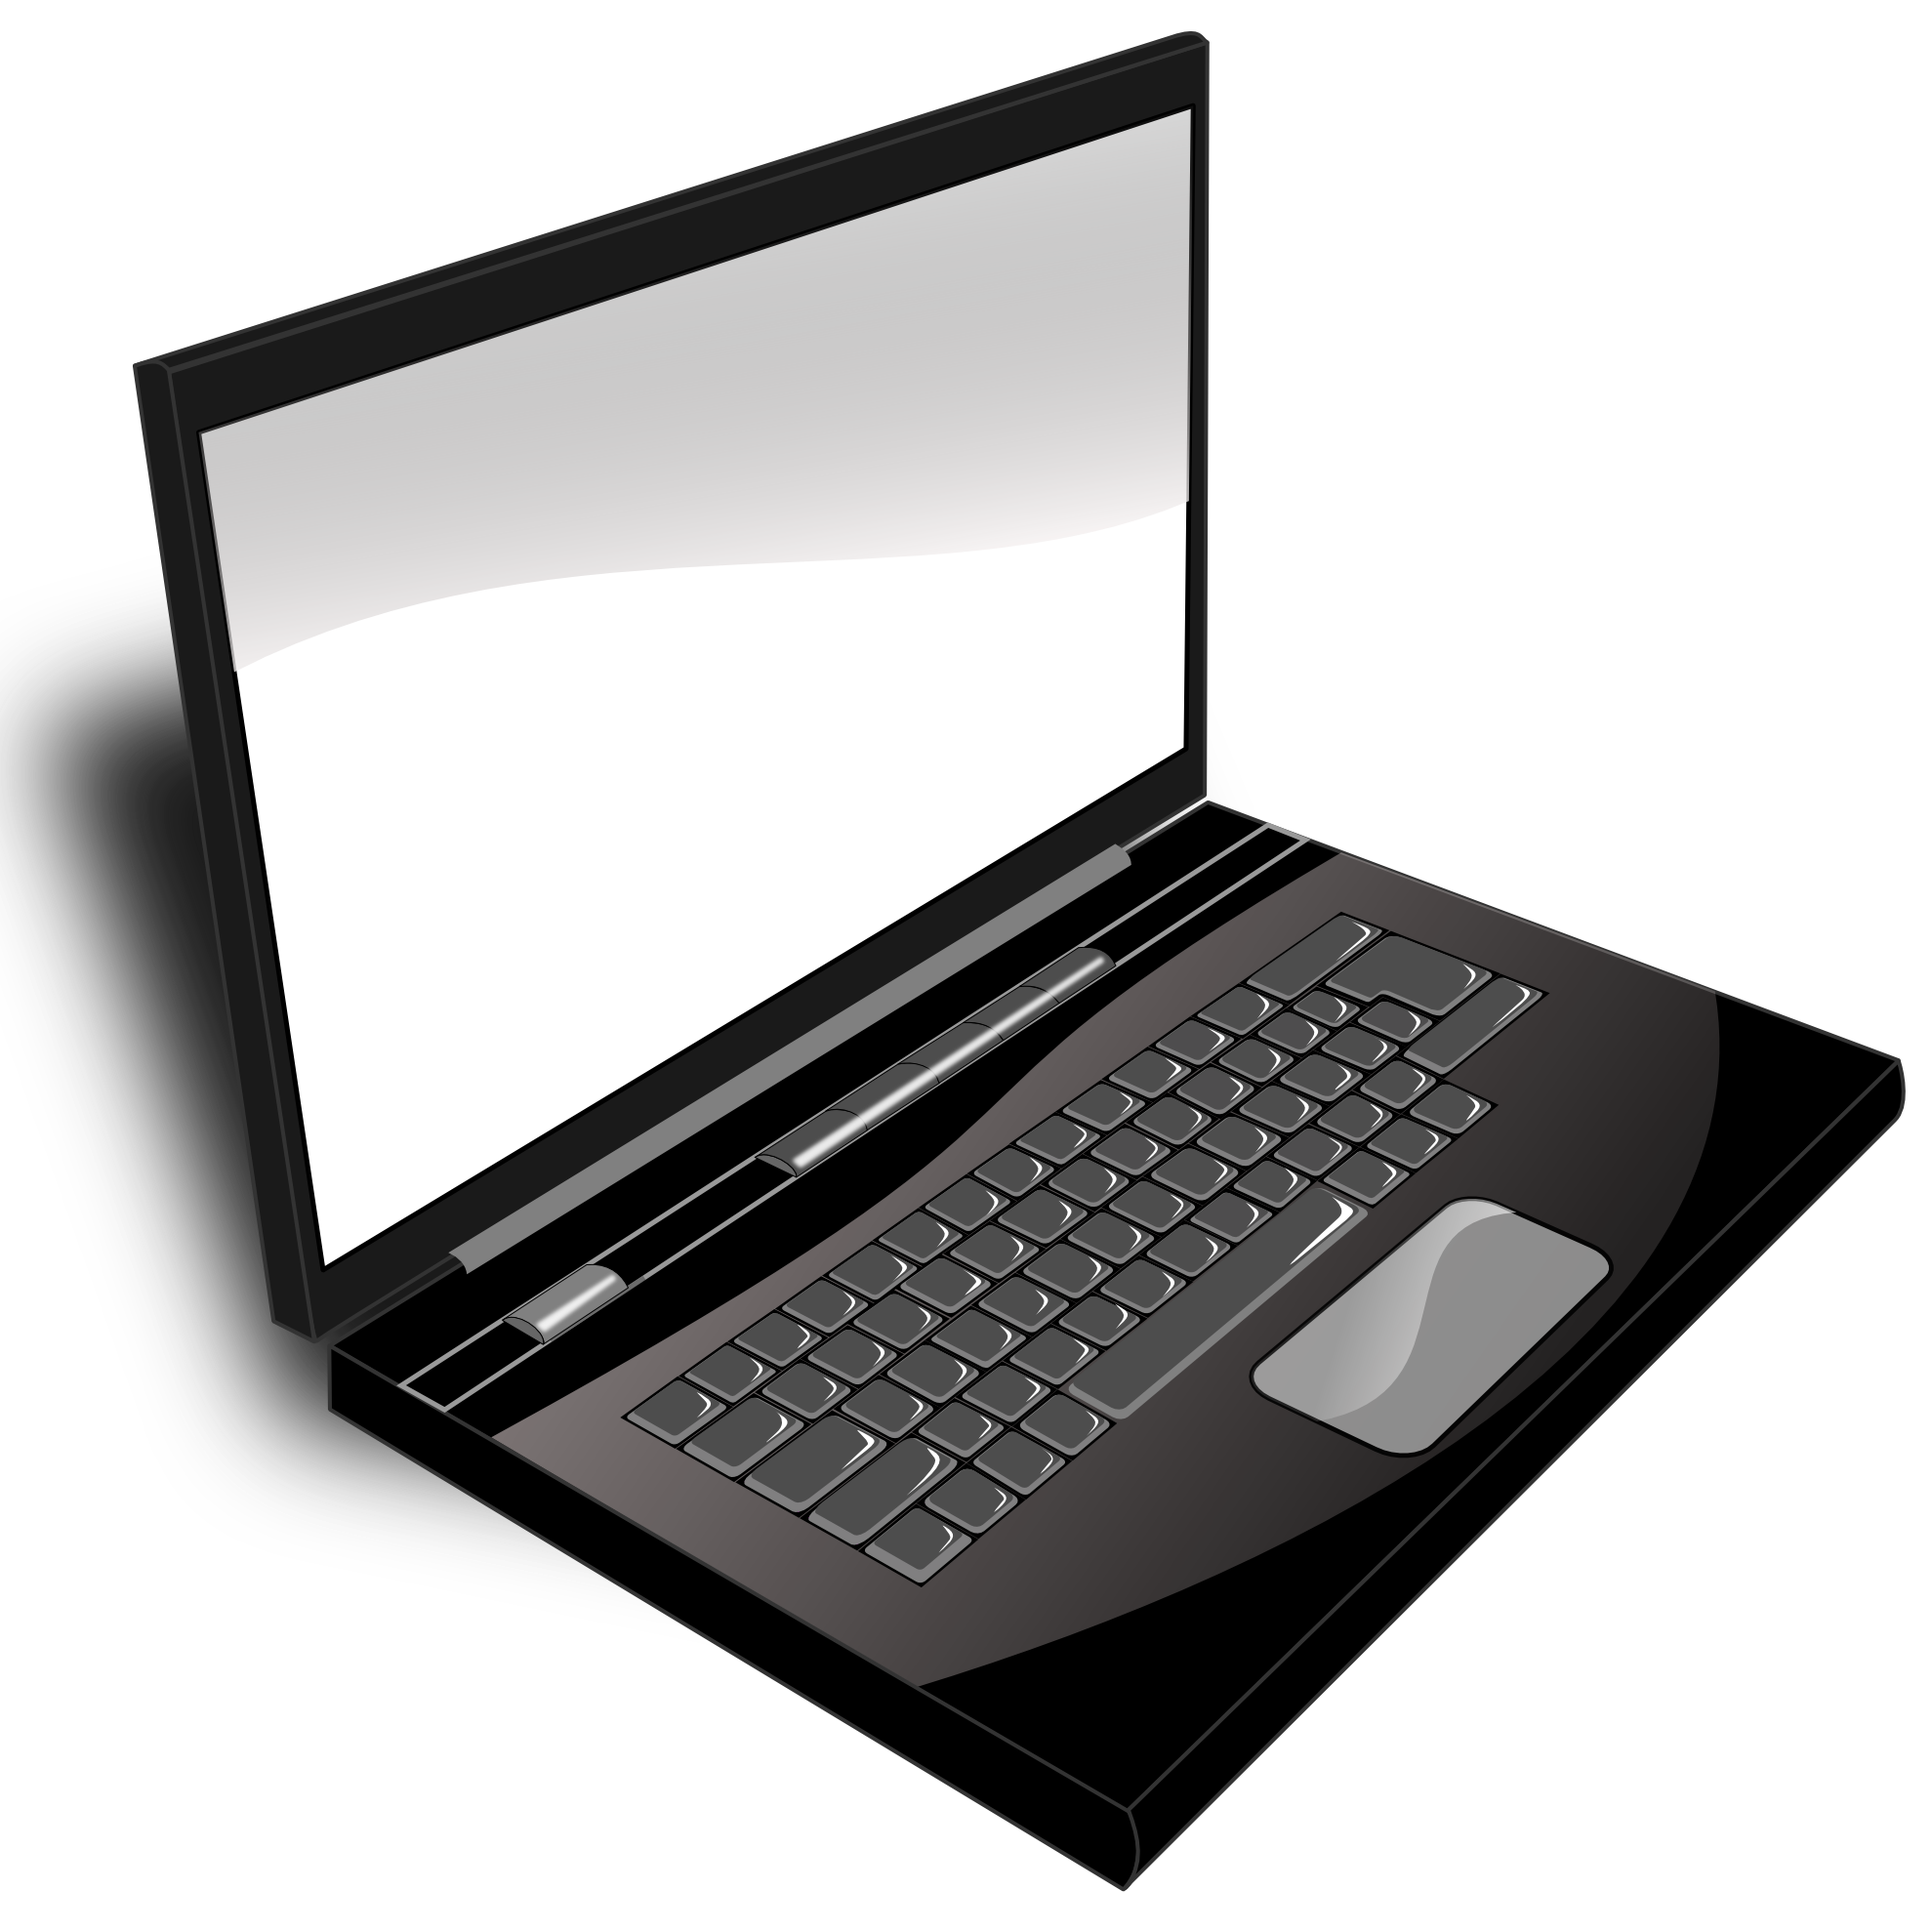 Laptop Computer Images | Clipart library - Free Clipart Images